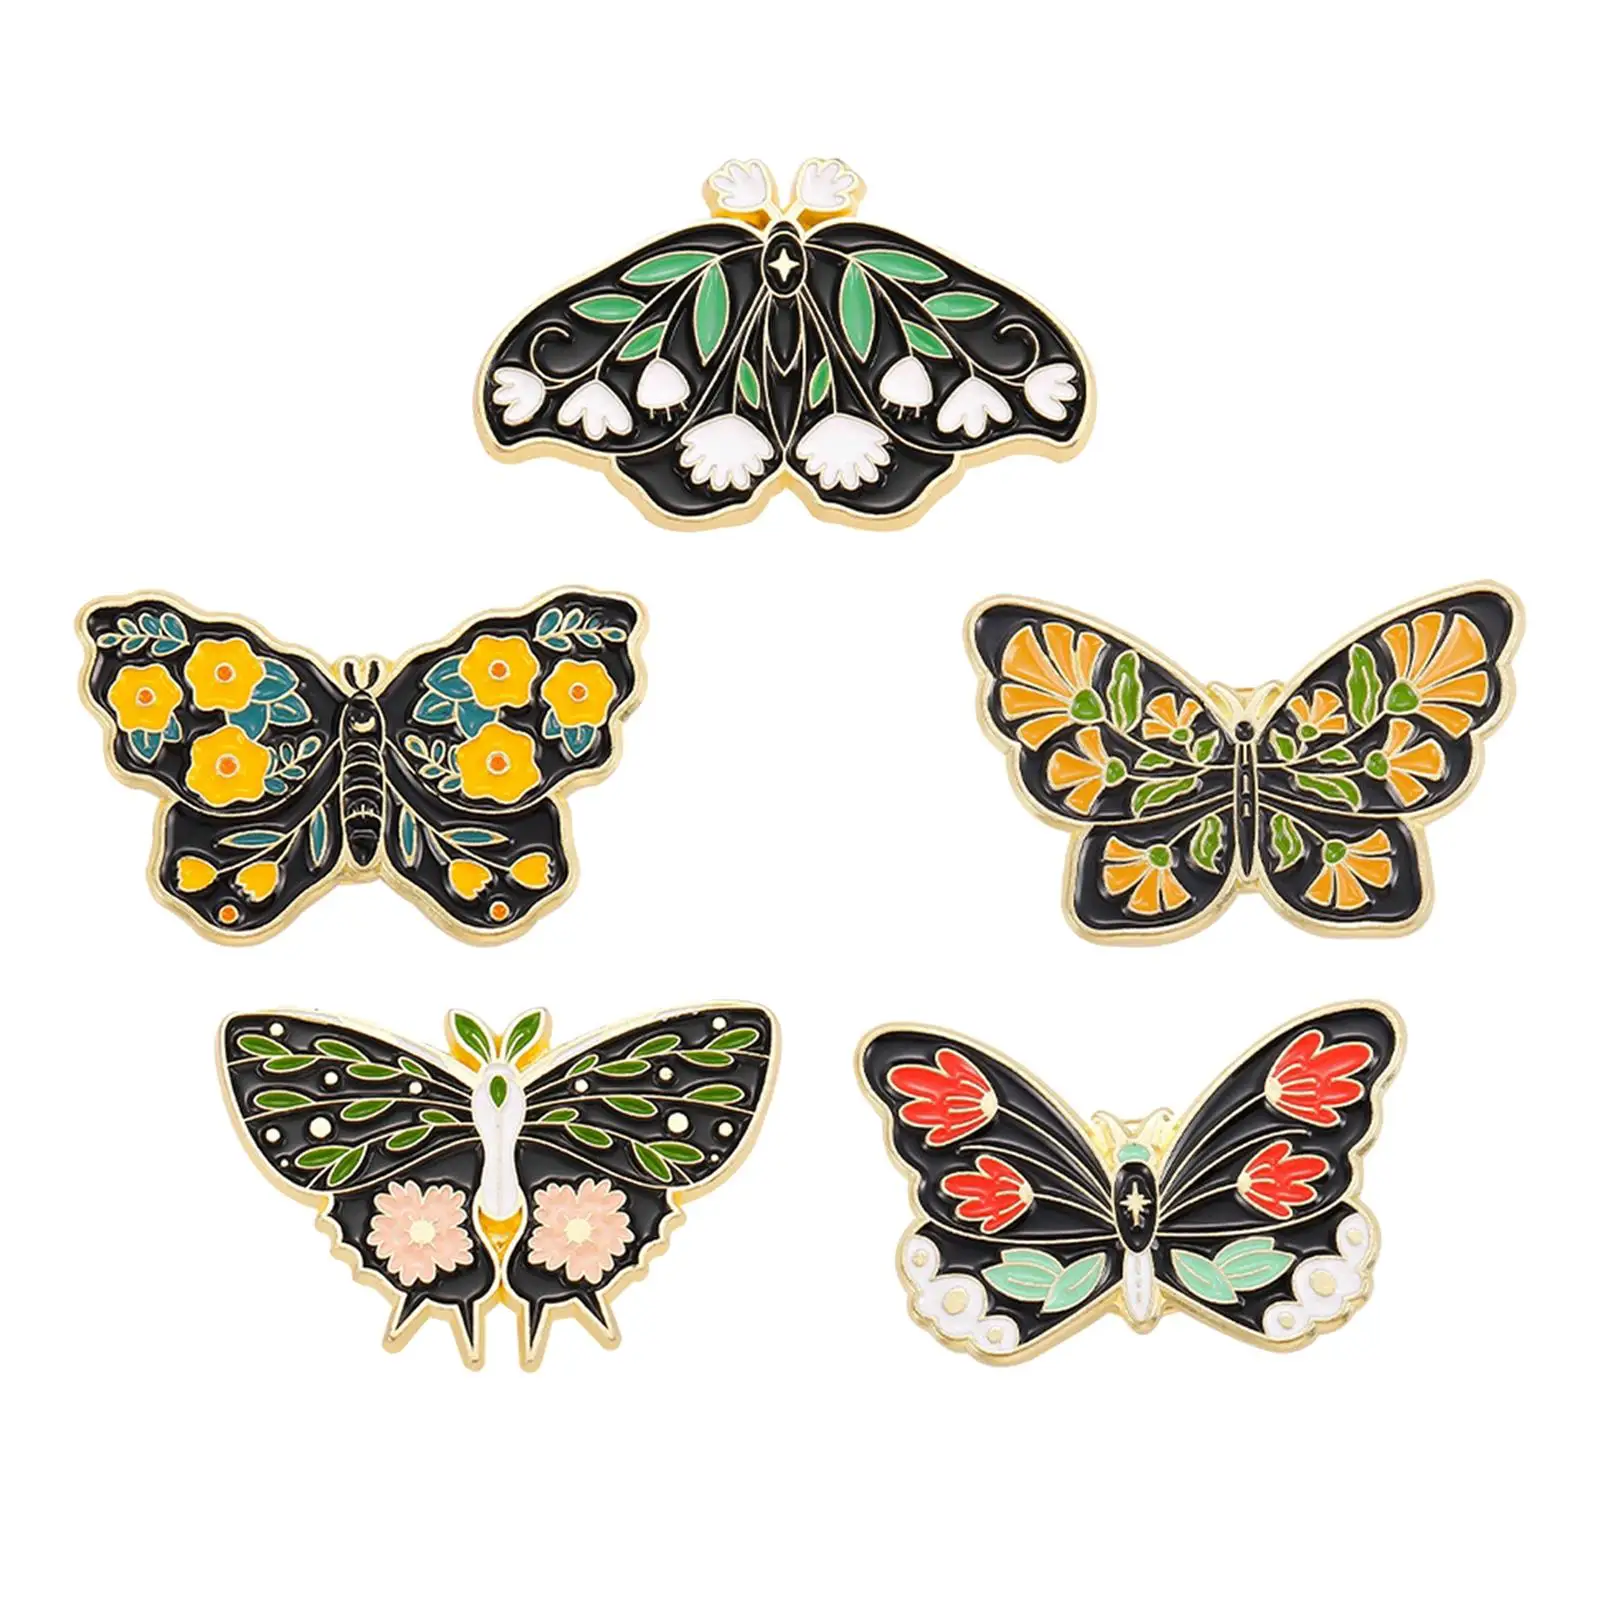 5x Butterfly Brooch Enamel Pins Decorative Jewelry Lapel Men Women Alloy Brooch for Jackets Clothes Holiday Wedding Party